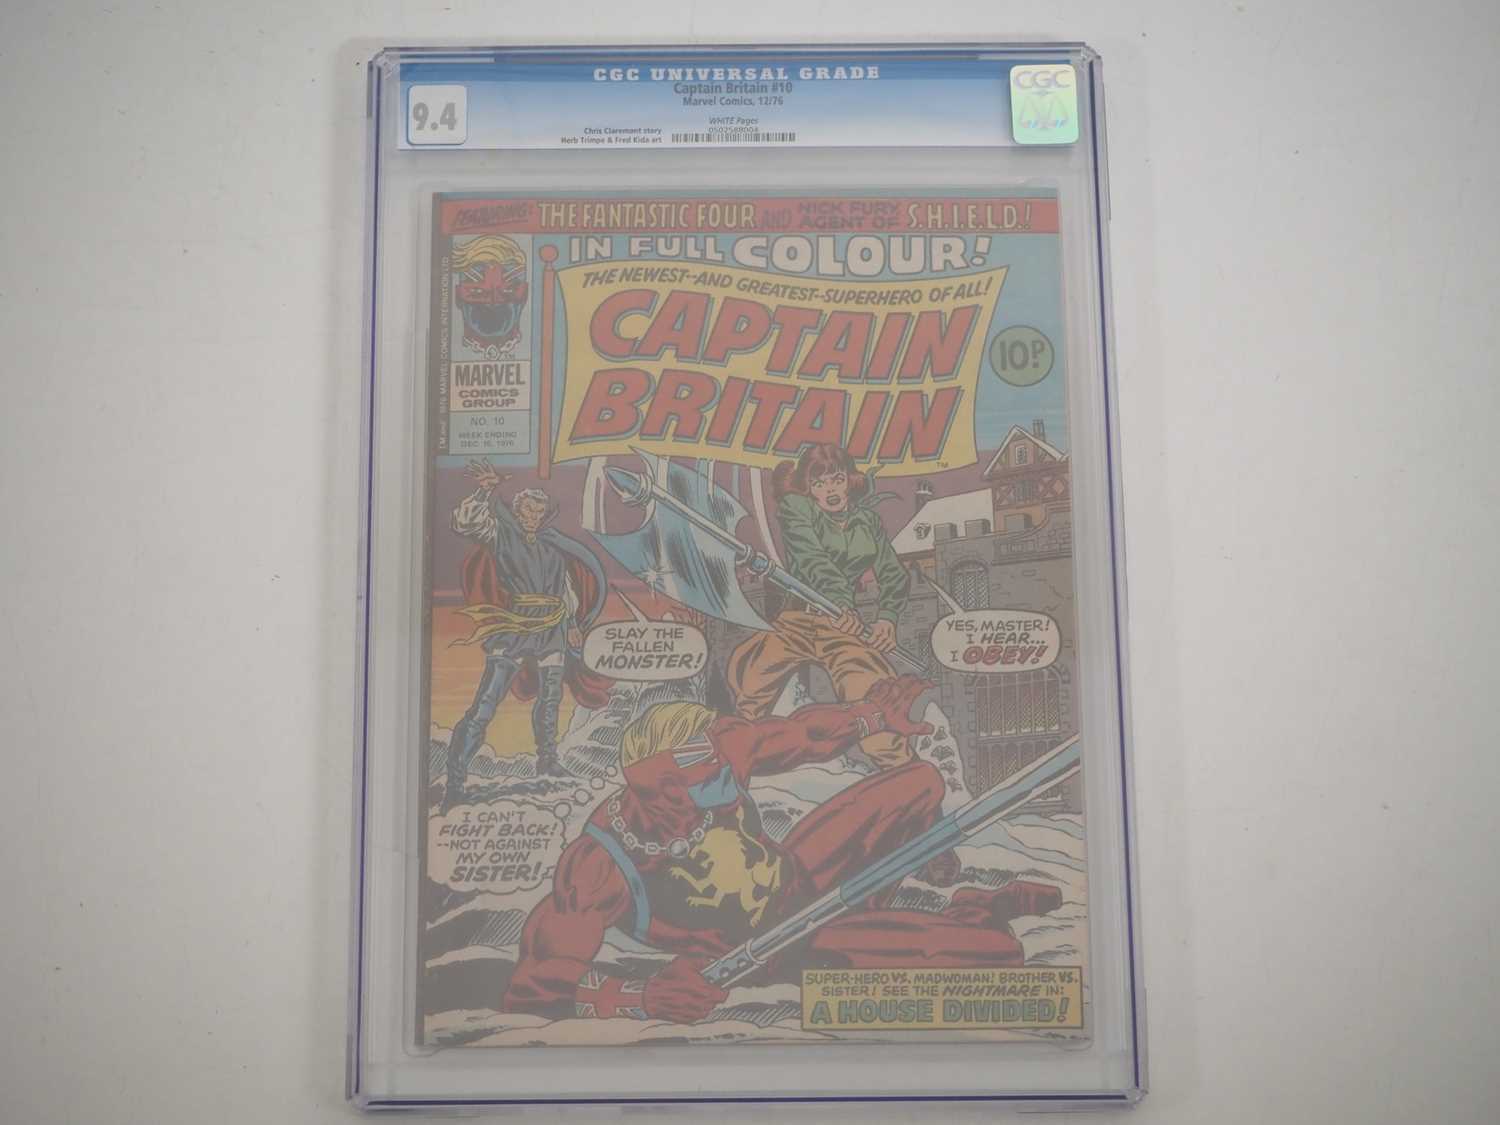 CAPTAIN BRITAIN #10 (1976 - MARVEL UK) - GRADED 9.4 (NM) by CGC - Dated December 15th - Includes the